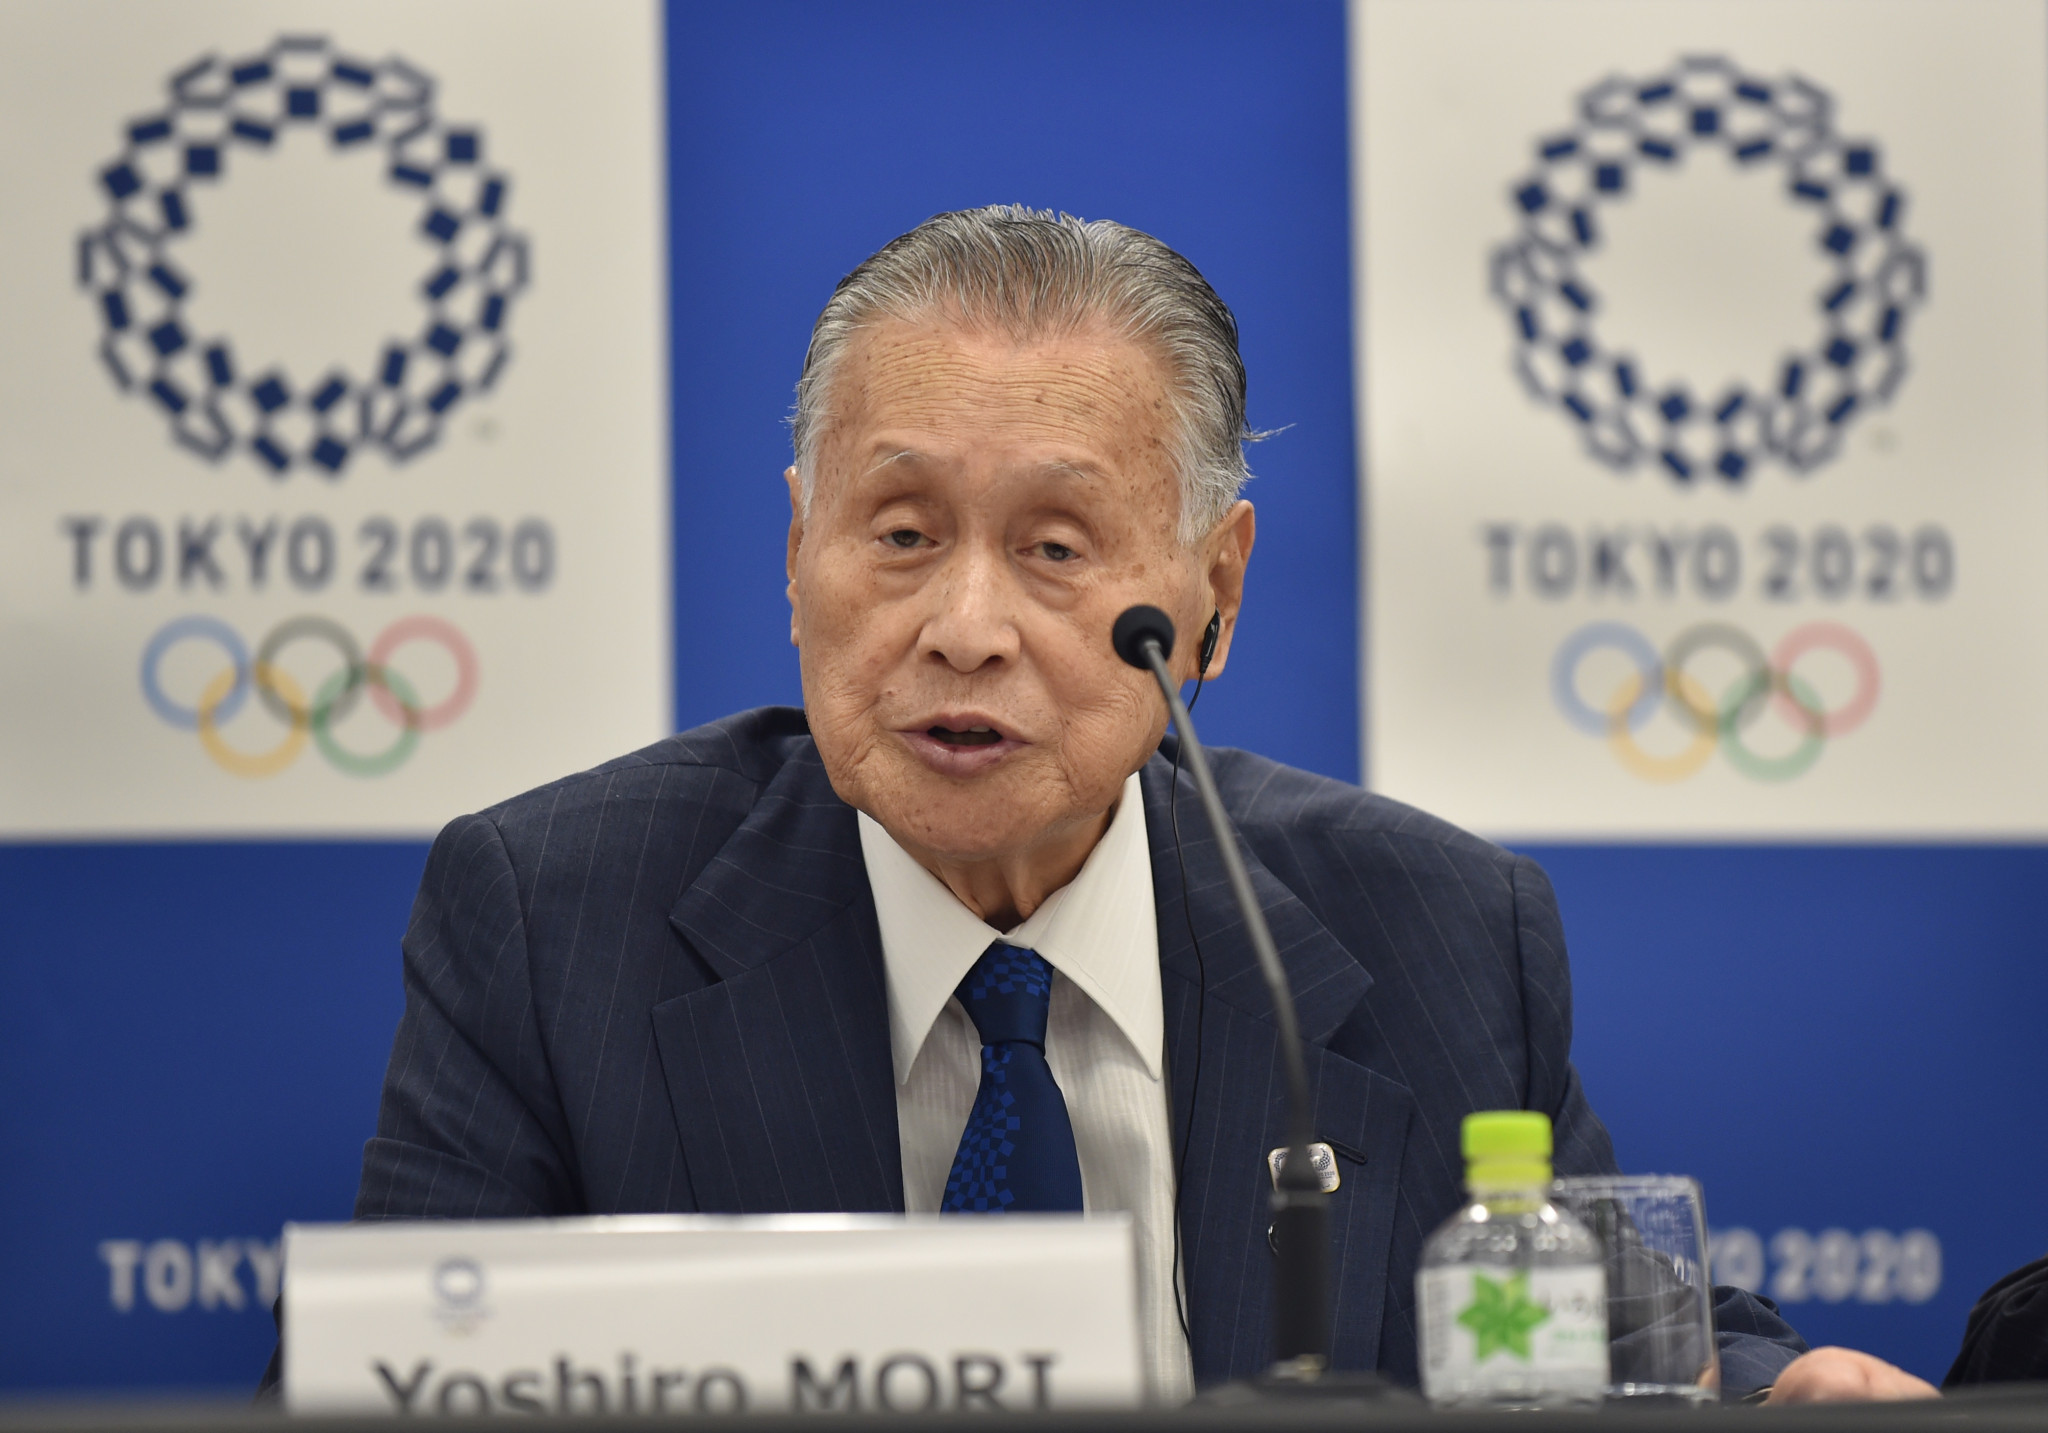 Tokyo 2020 President warns WBSC money-saving plans could derail hopes of more matches at Olympics